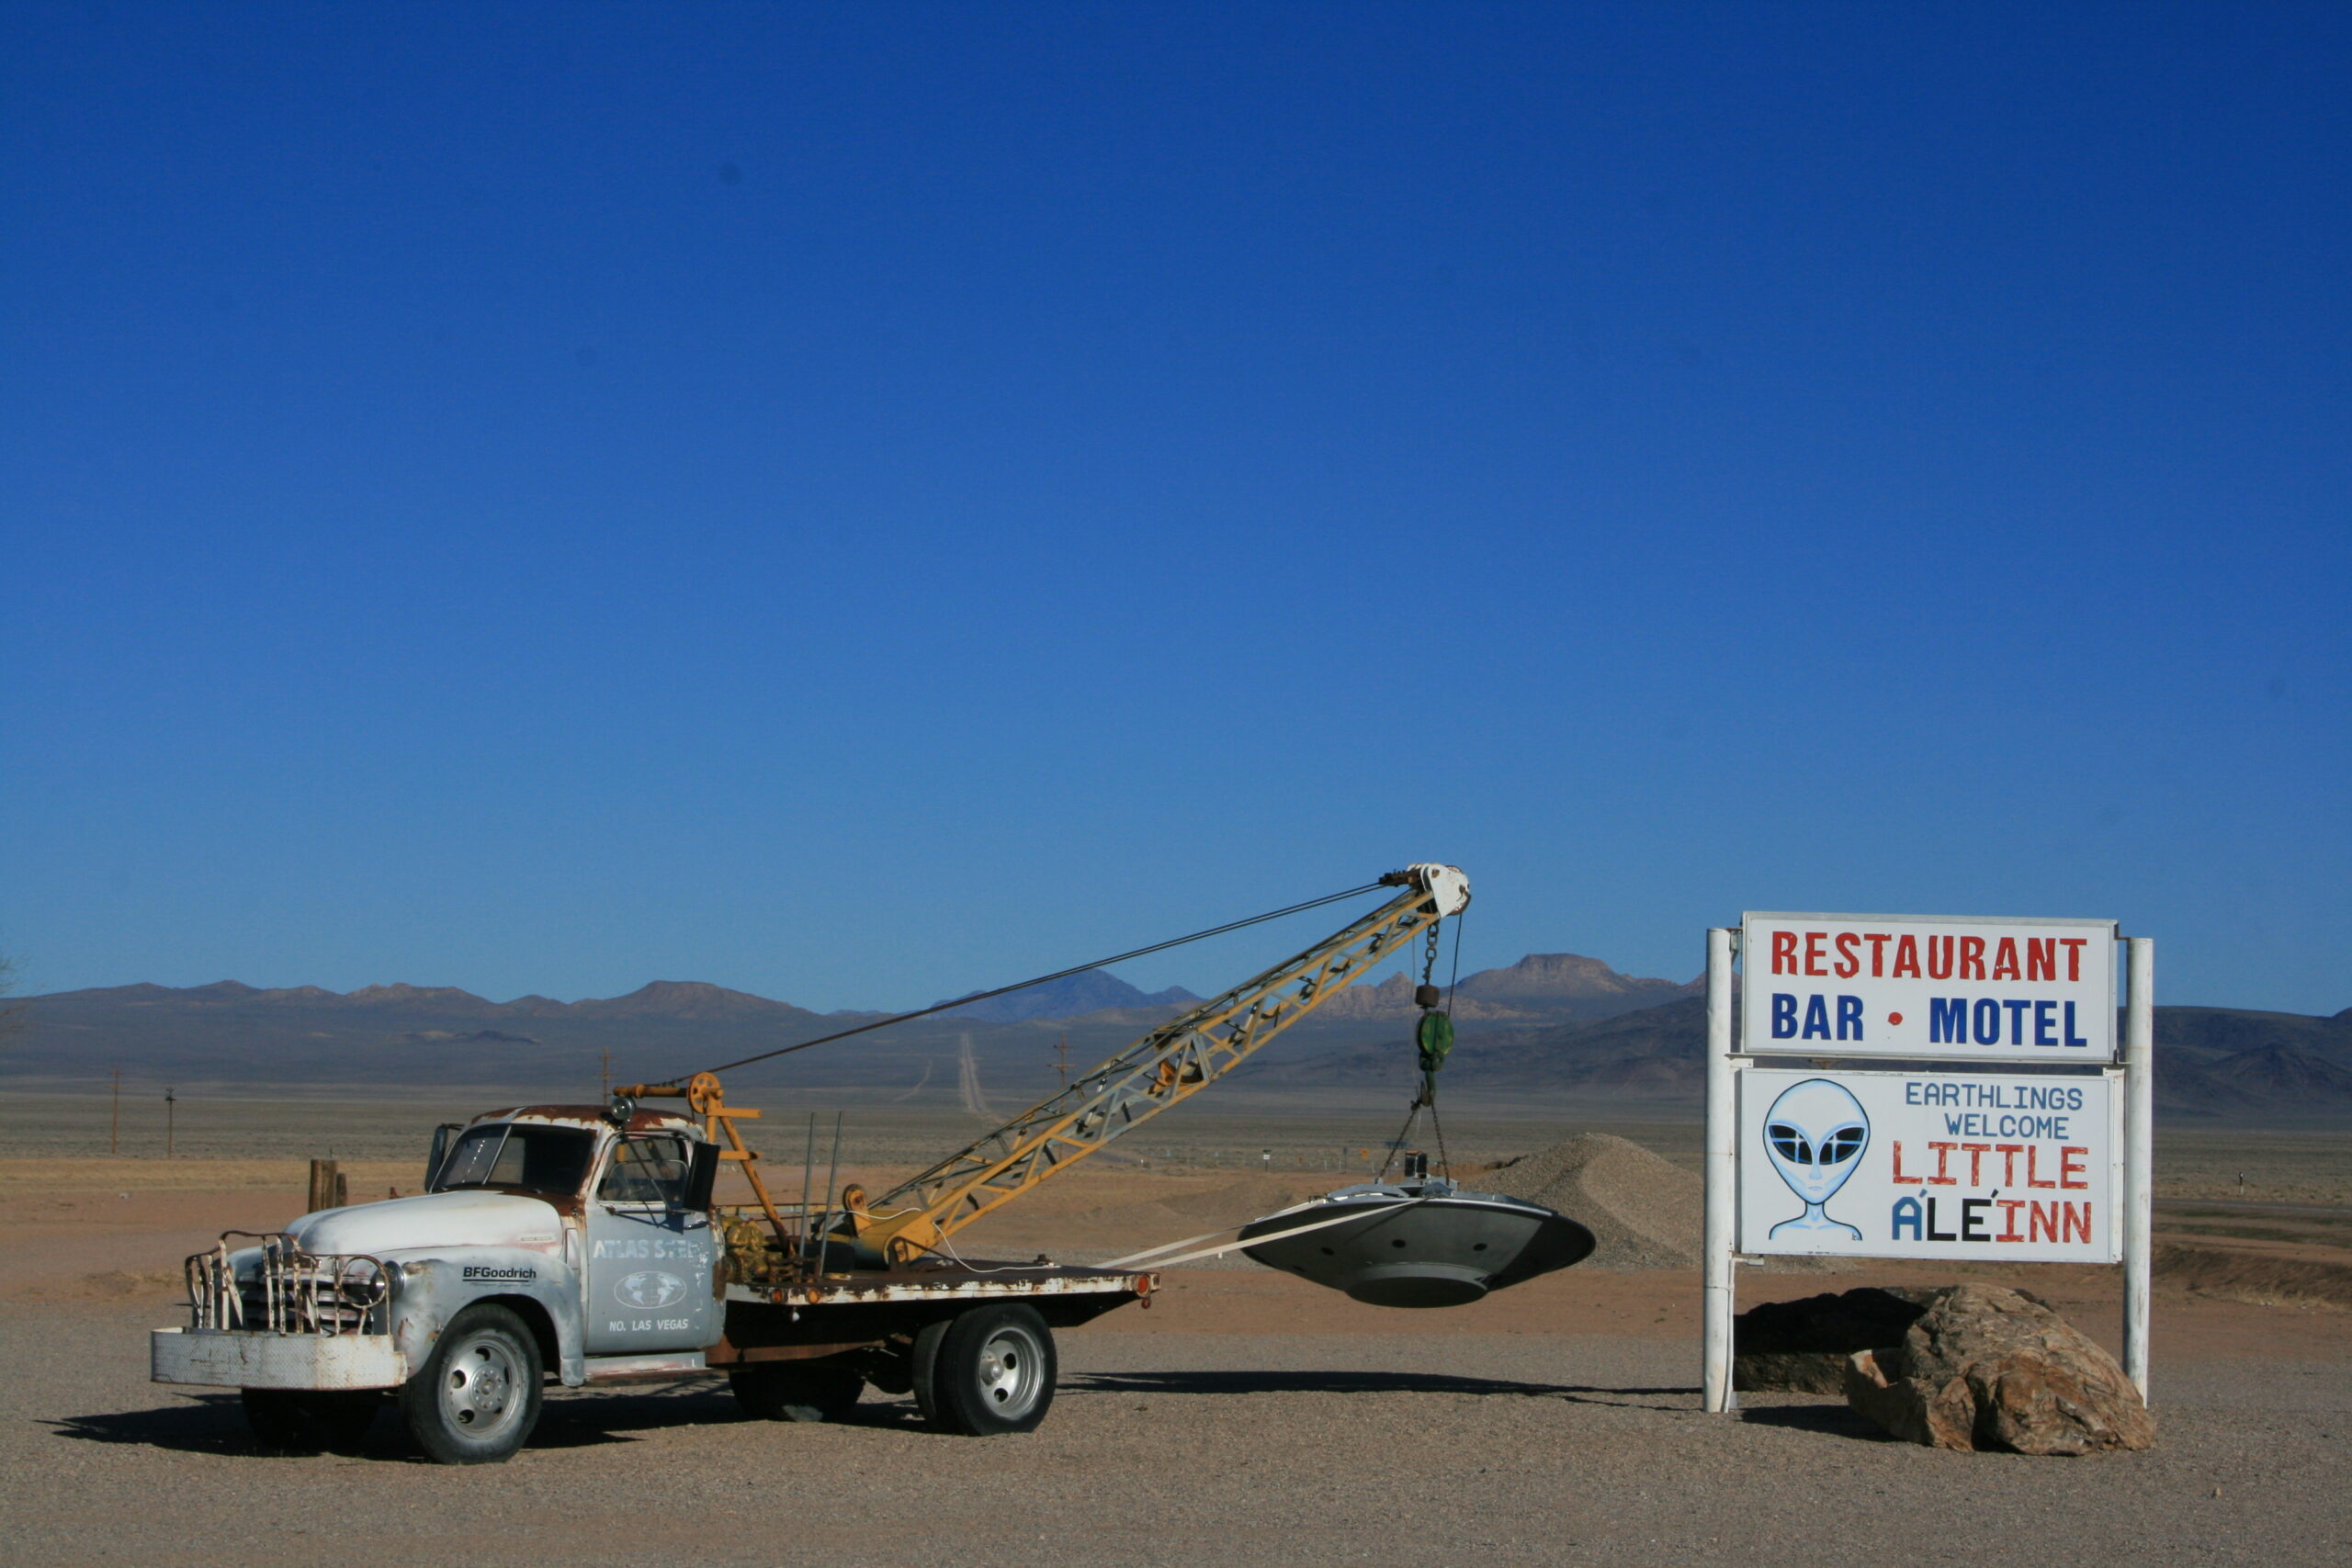 A vintage tow truck carries a flying saucer outside the Little A'le'inn motel in Rachel, Nevada.